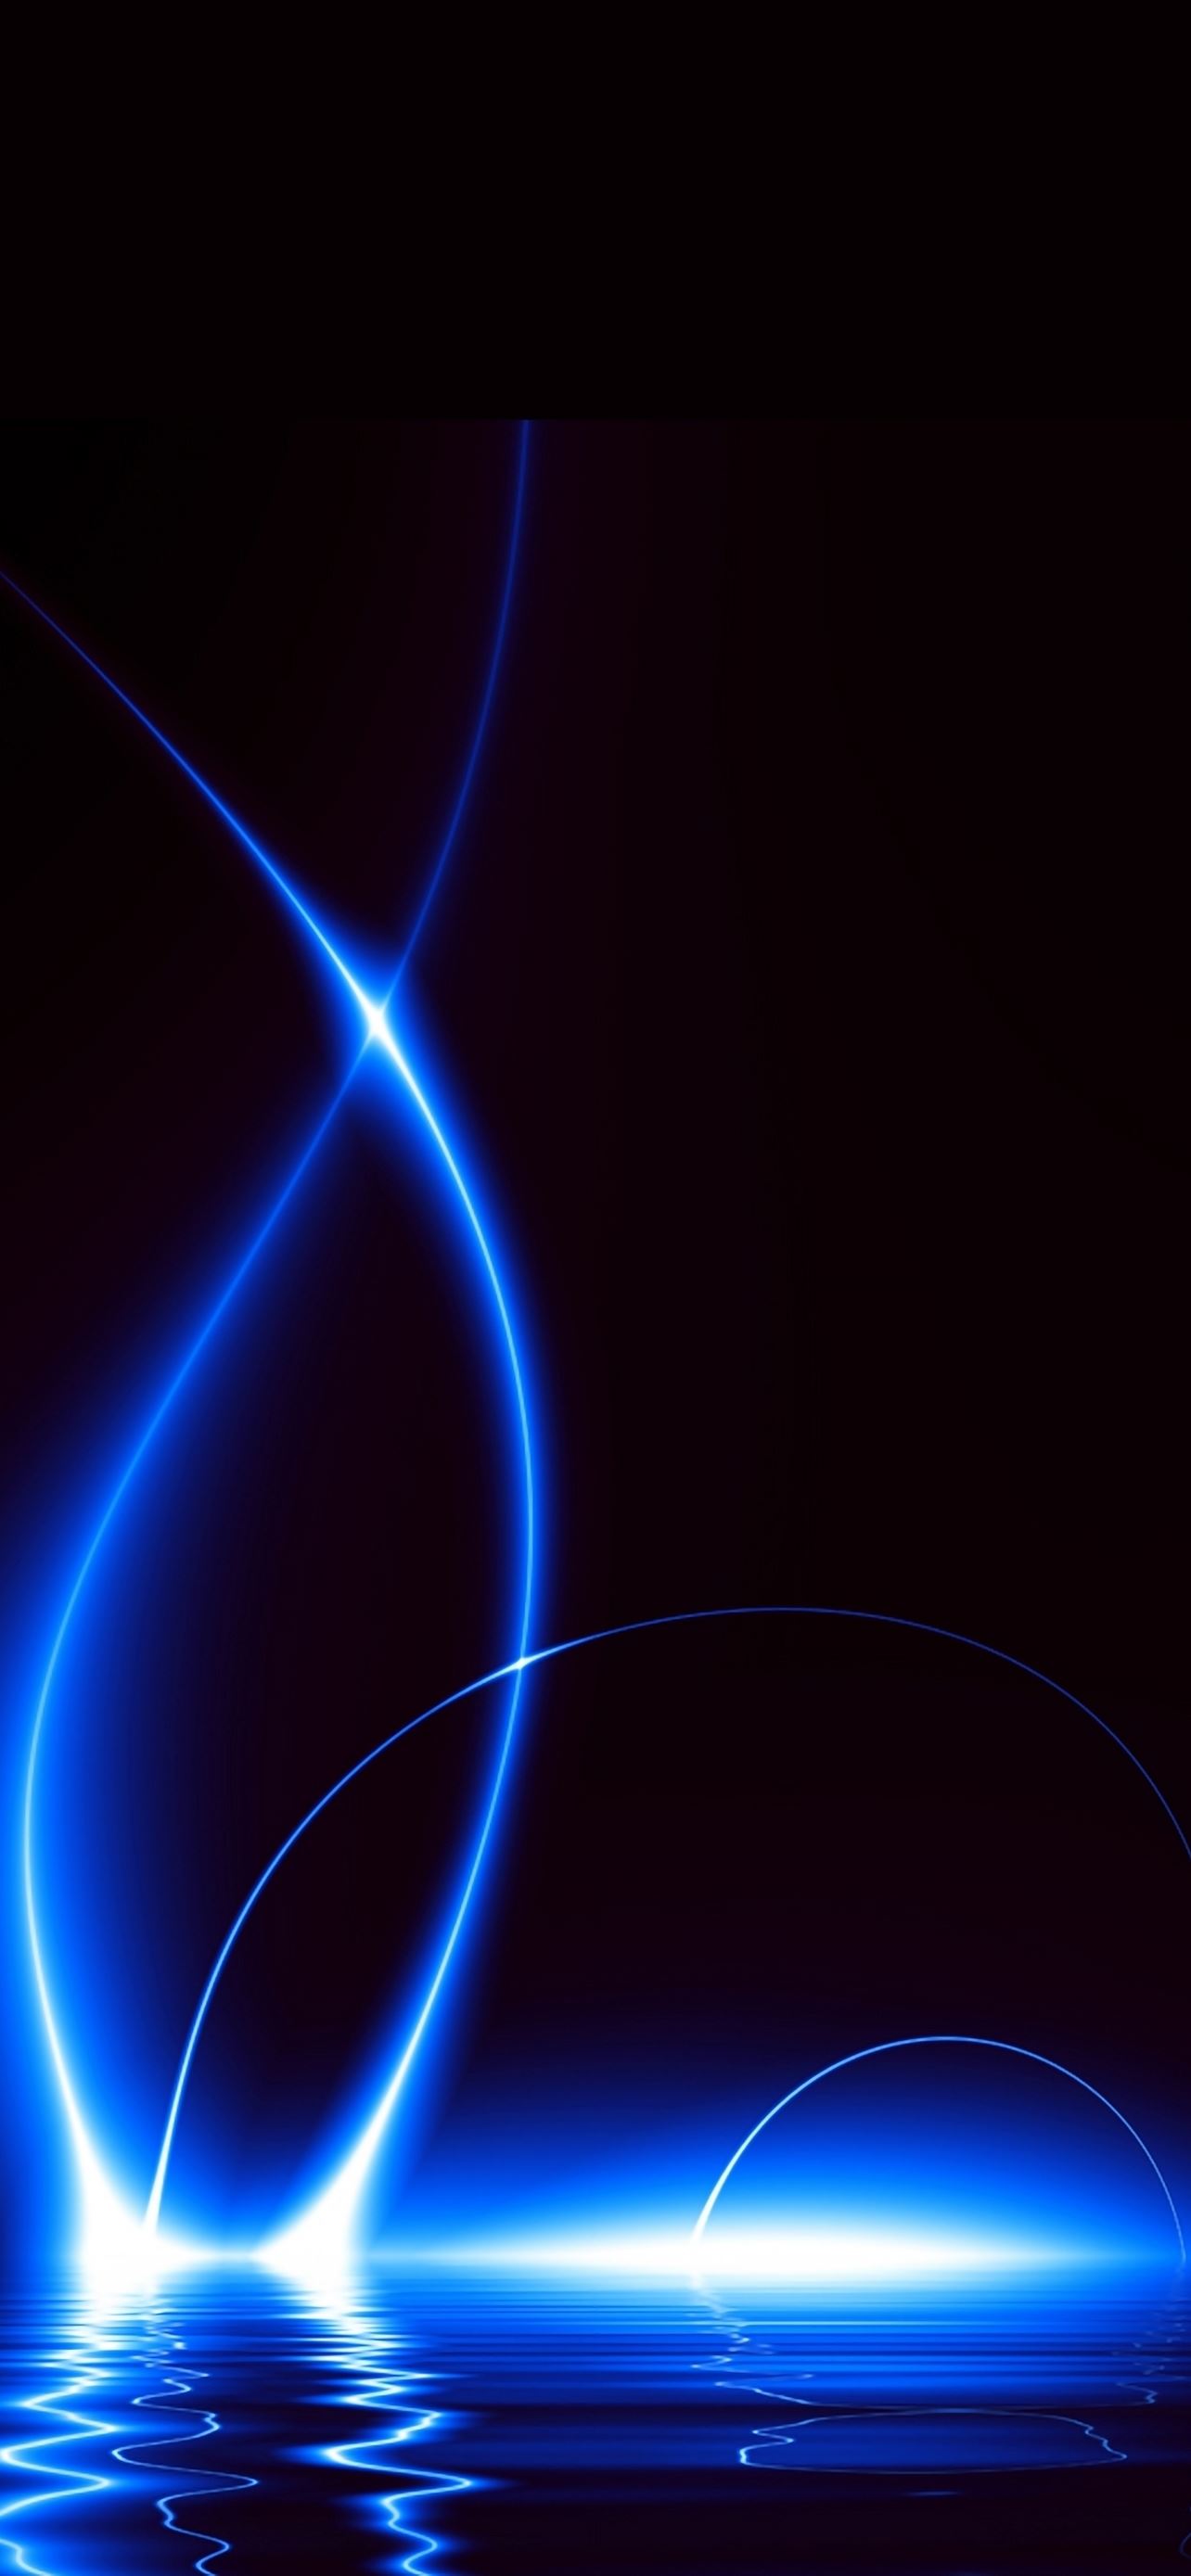 Blue Lights iPhone Wallpaper Free Download